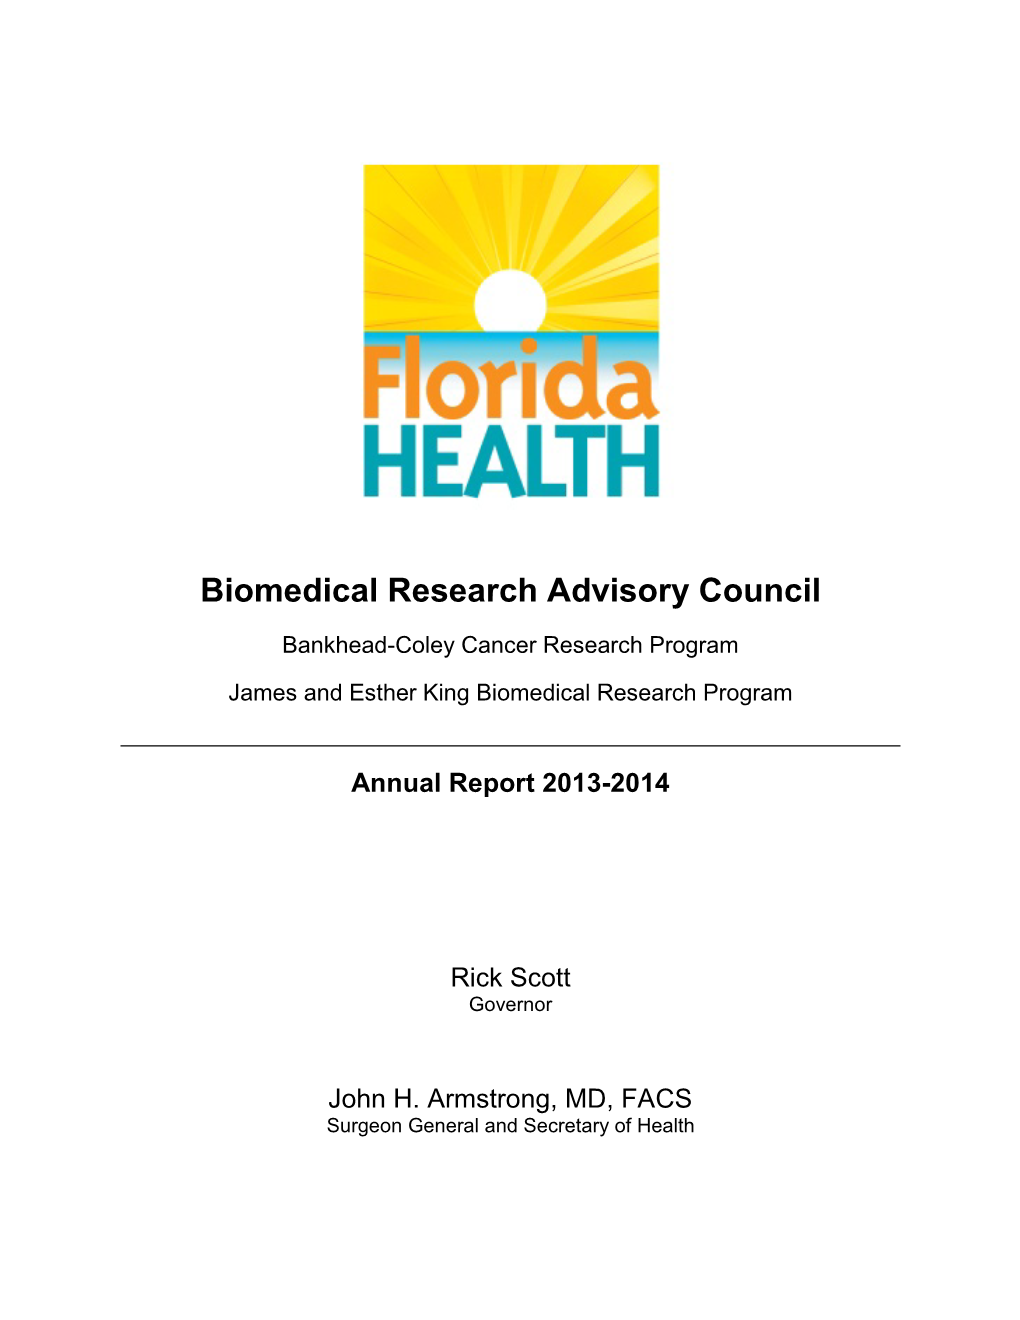 Biomedical Research Advisory Council Annual Report 2013-2014